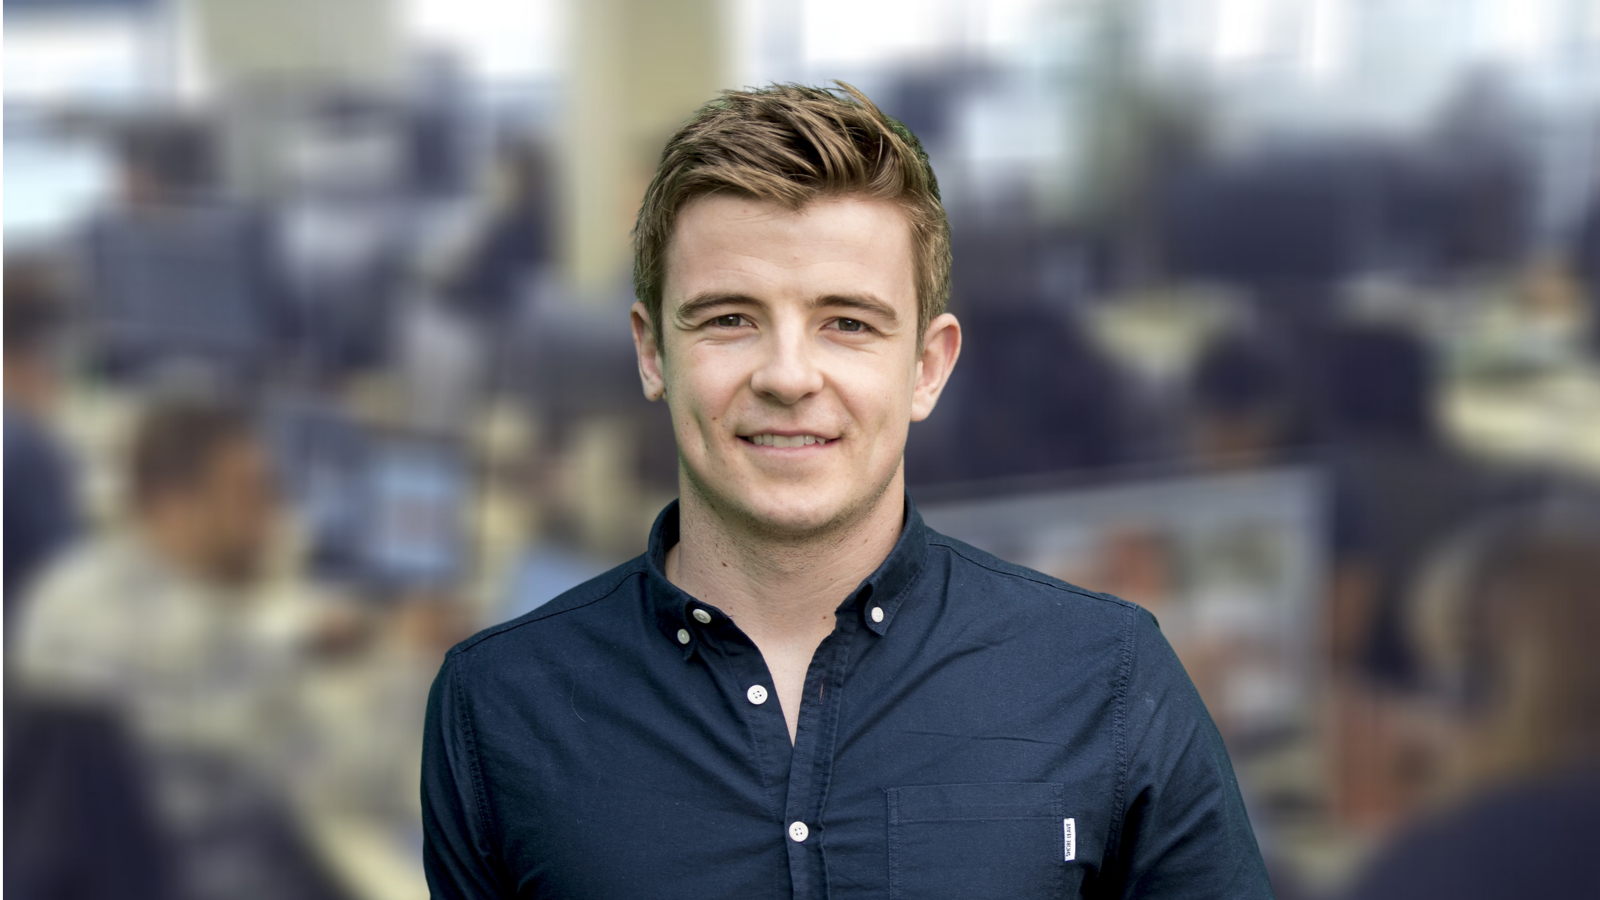 Meet the team: Product Marketing Manager, Ian Cassidy